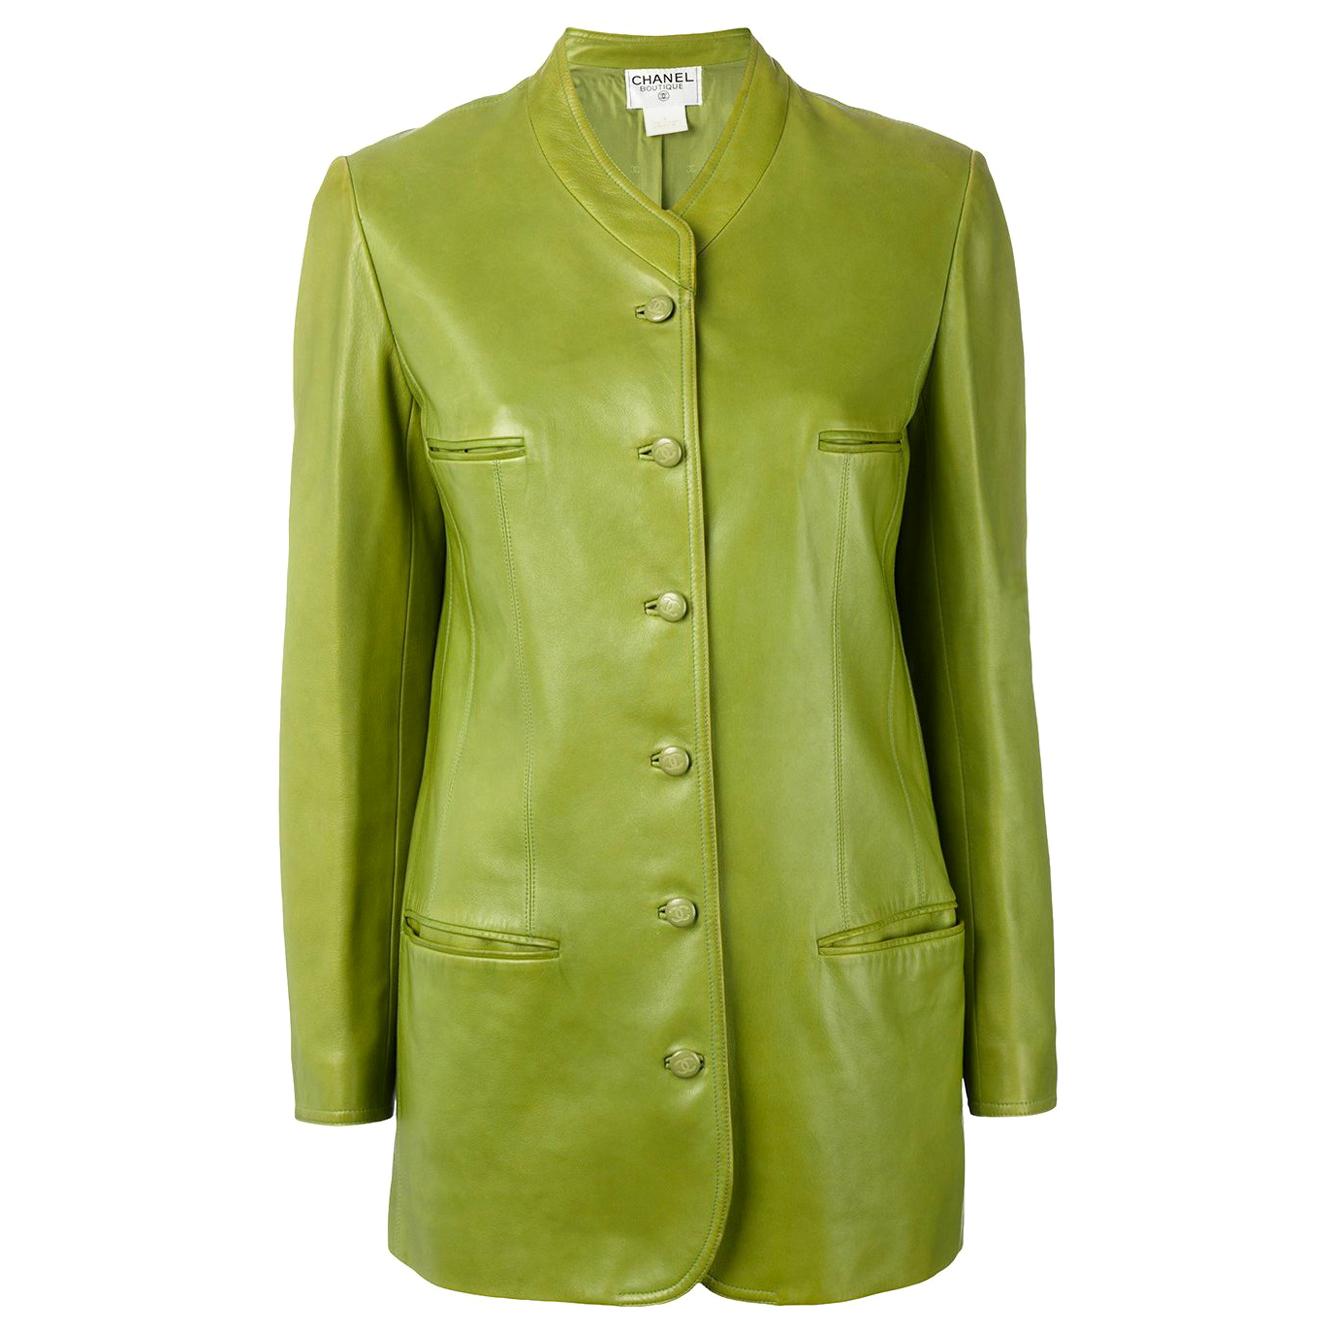 Chanel Green Leather Vintage Jacket, 1990s